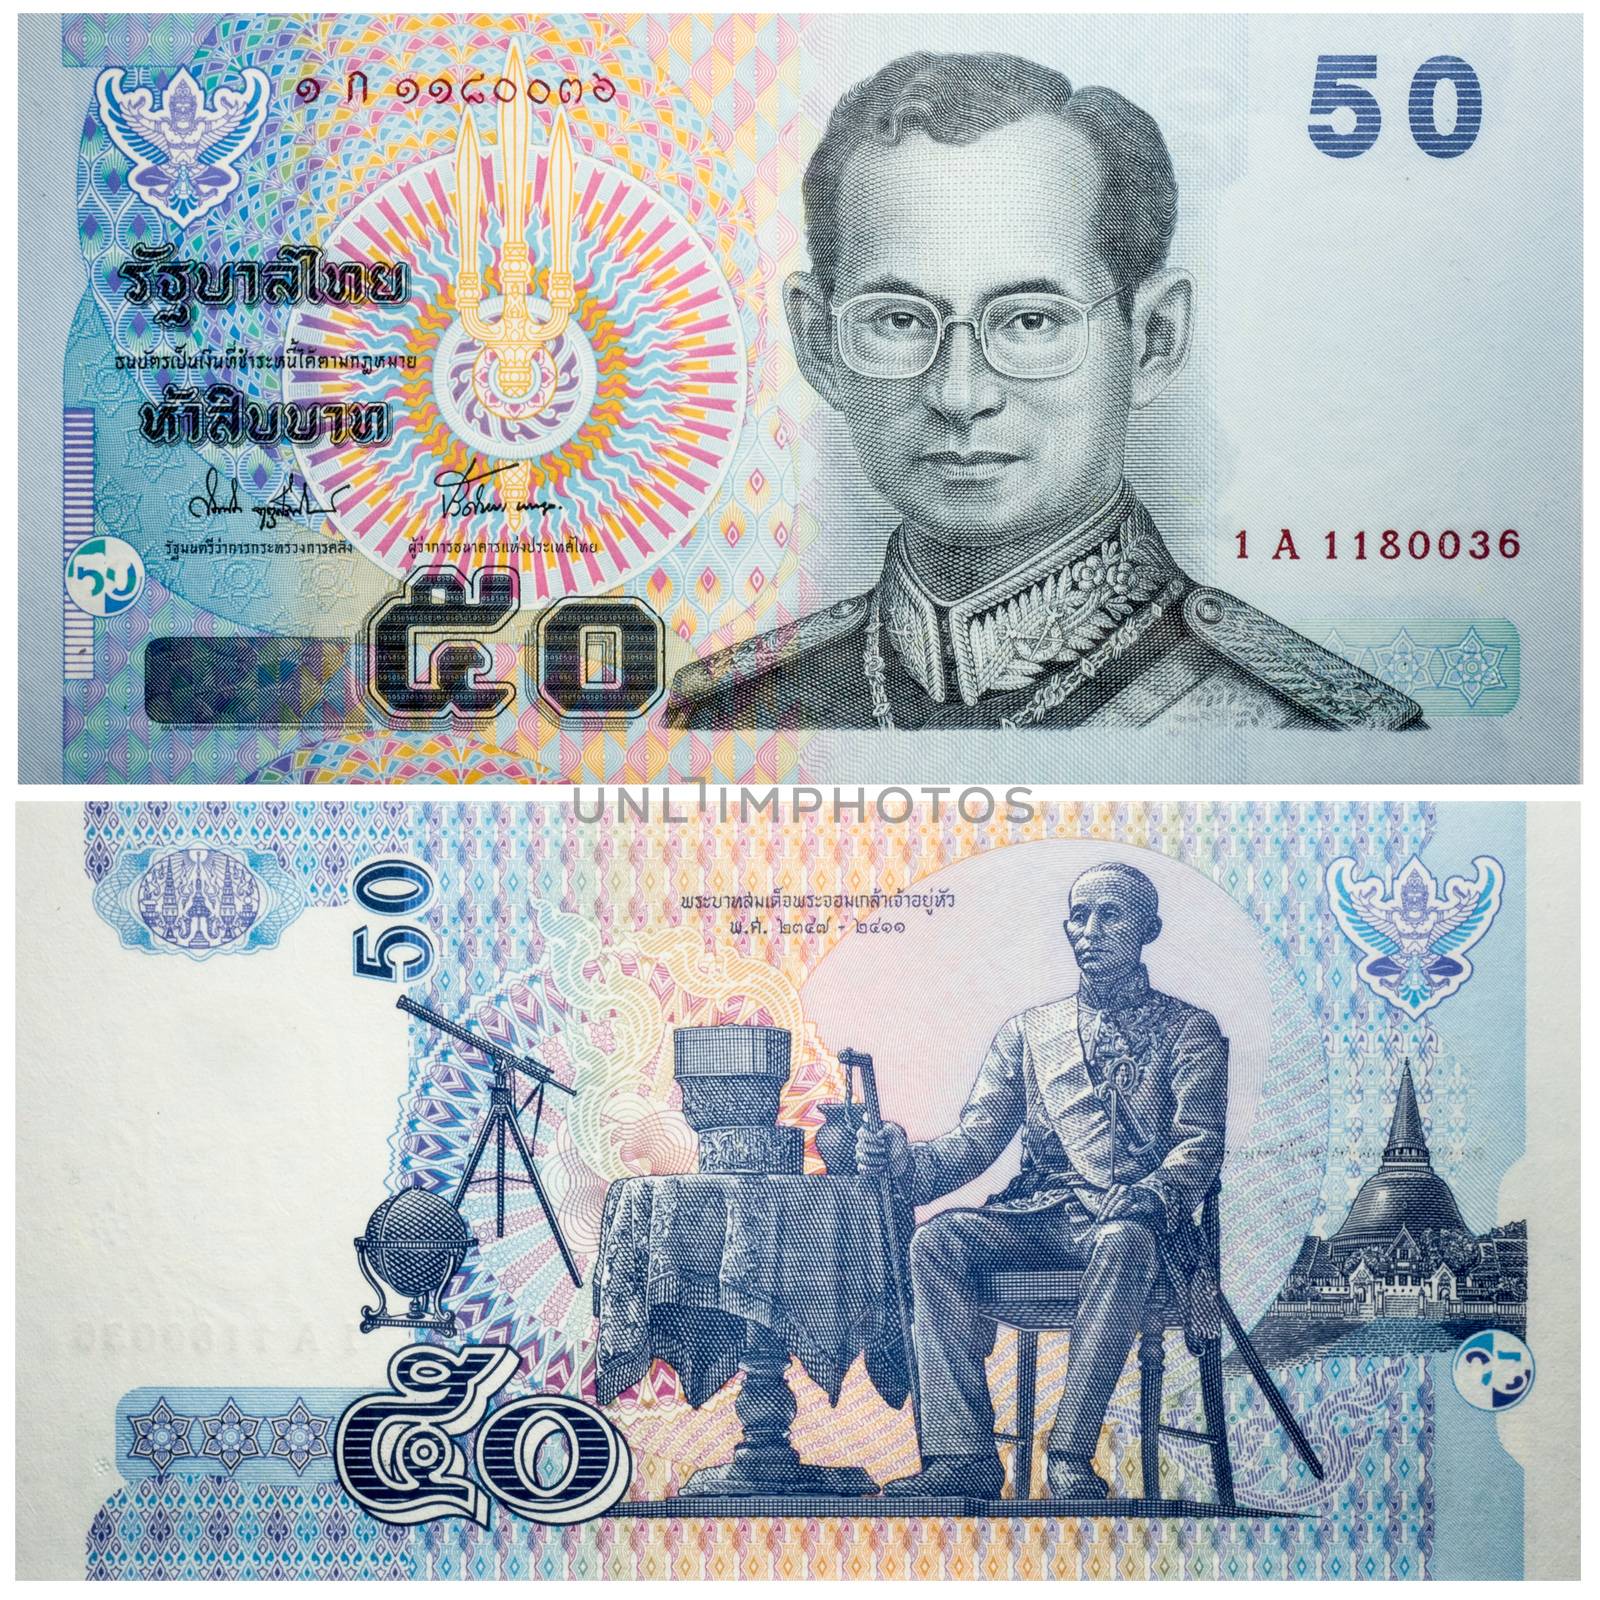 Banknote 50 baht Thailand front and back isolated on white emitted on 2004. King Rama lX in Field Marshal's uniform at center right, arms at upper left. Back: King Rama VI seated at table at center right, telescope and globe at center left